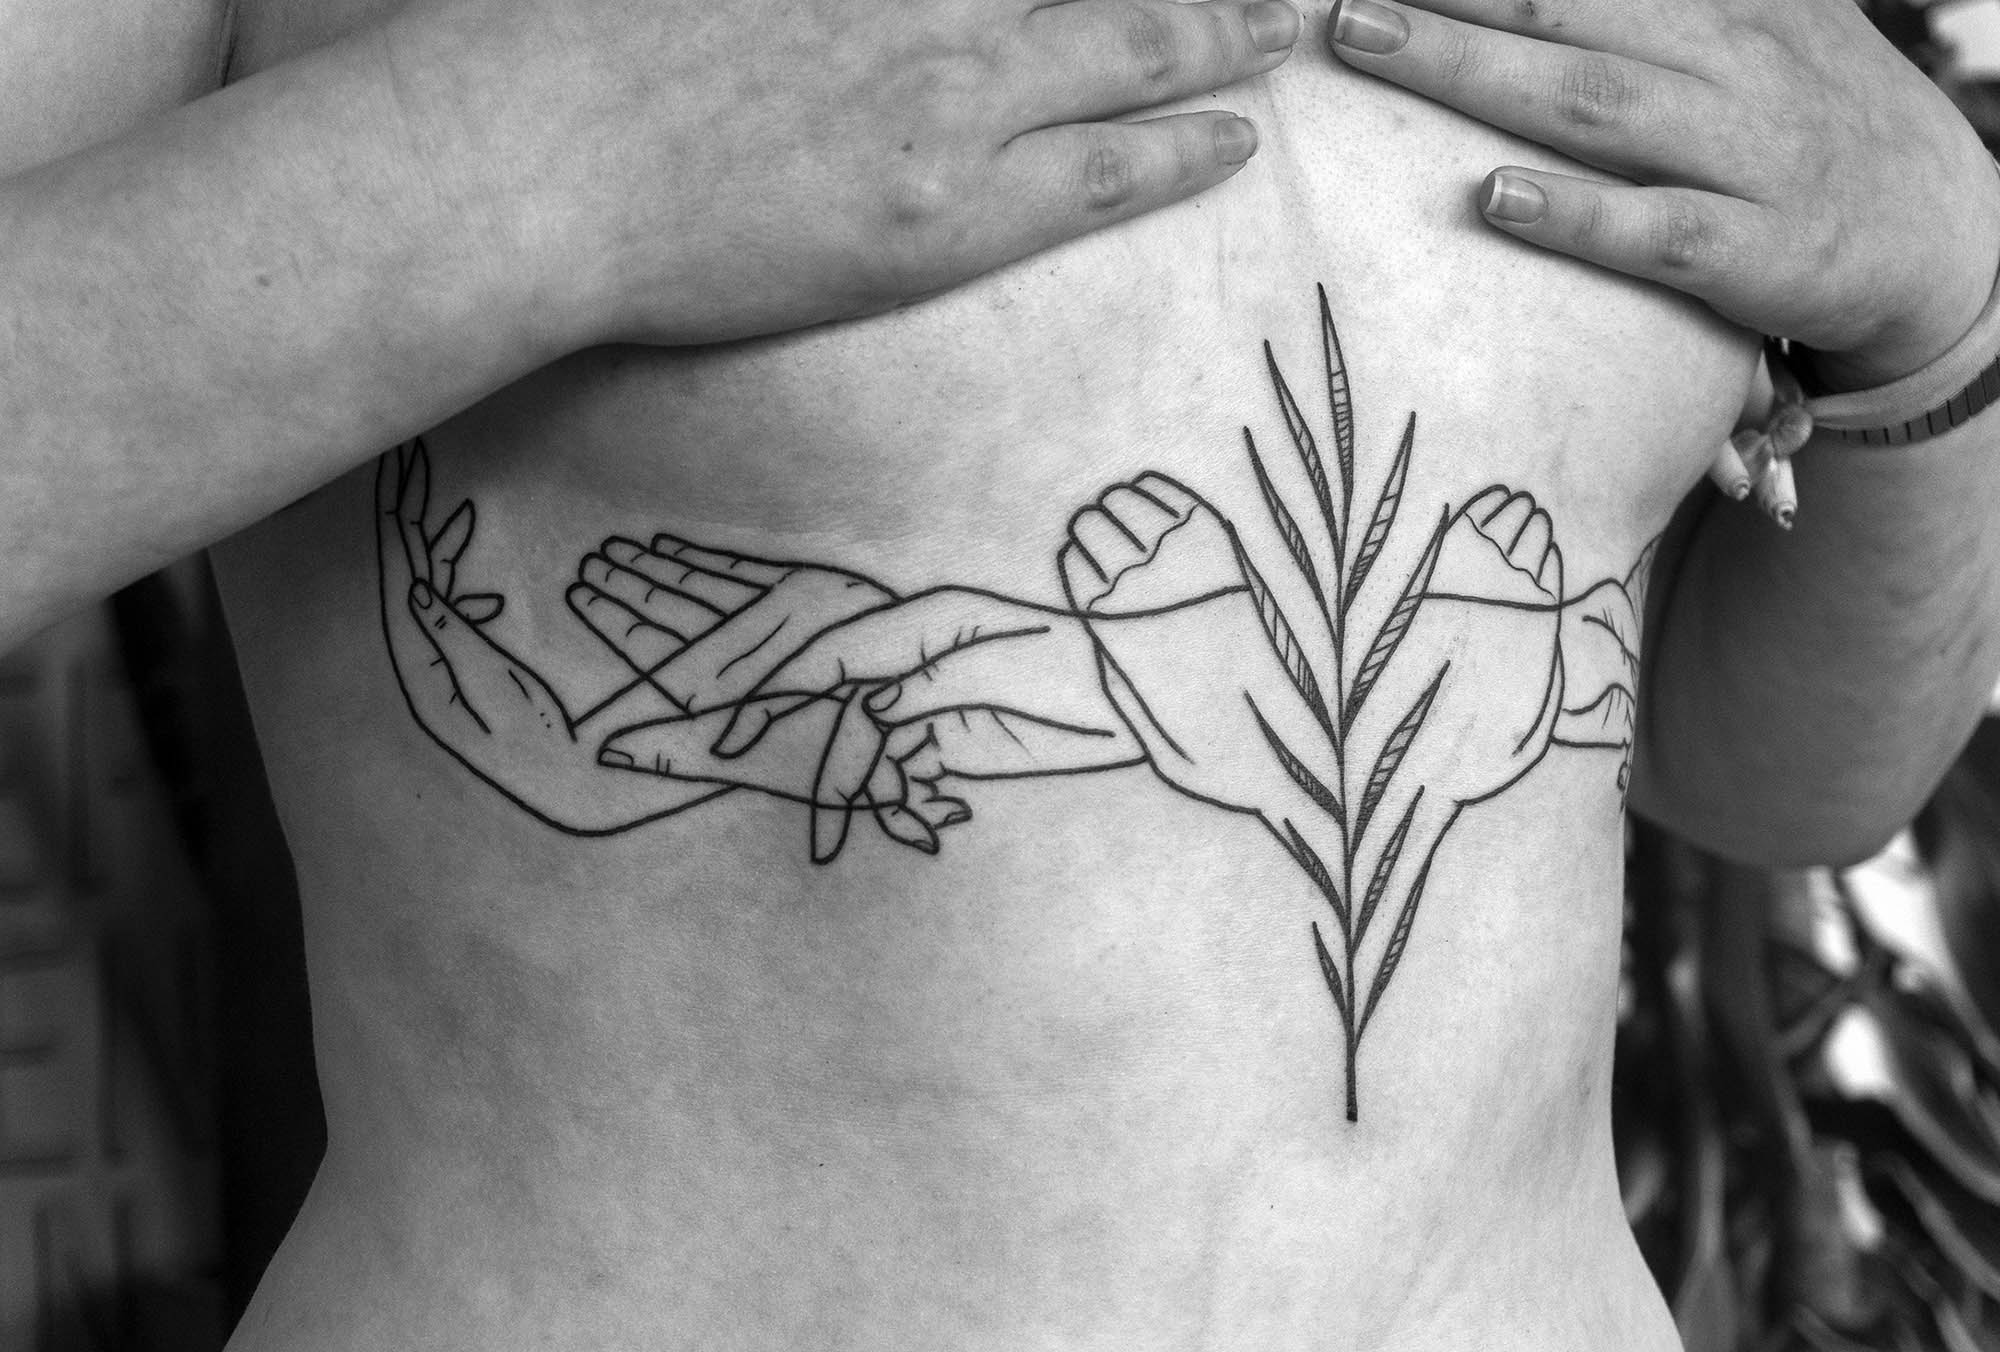 Line drawing hands on stomach tattoo